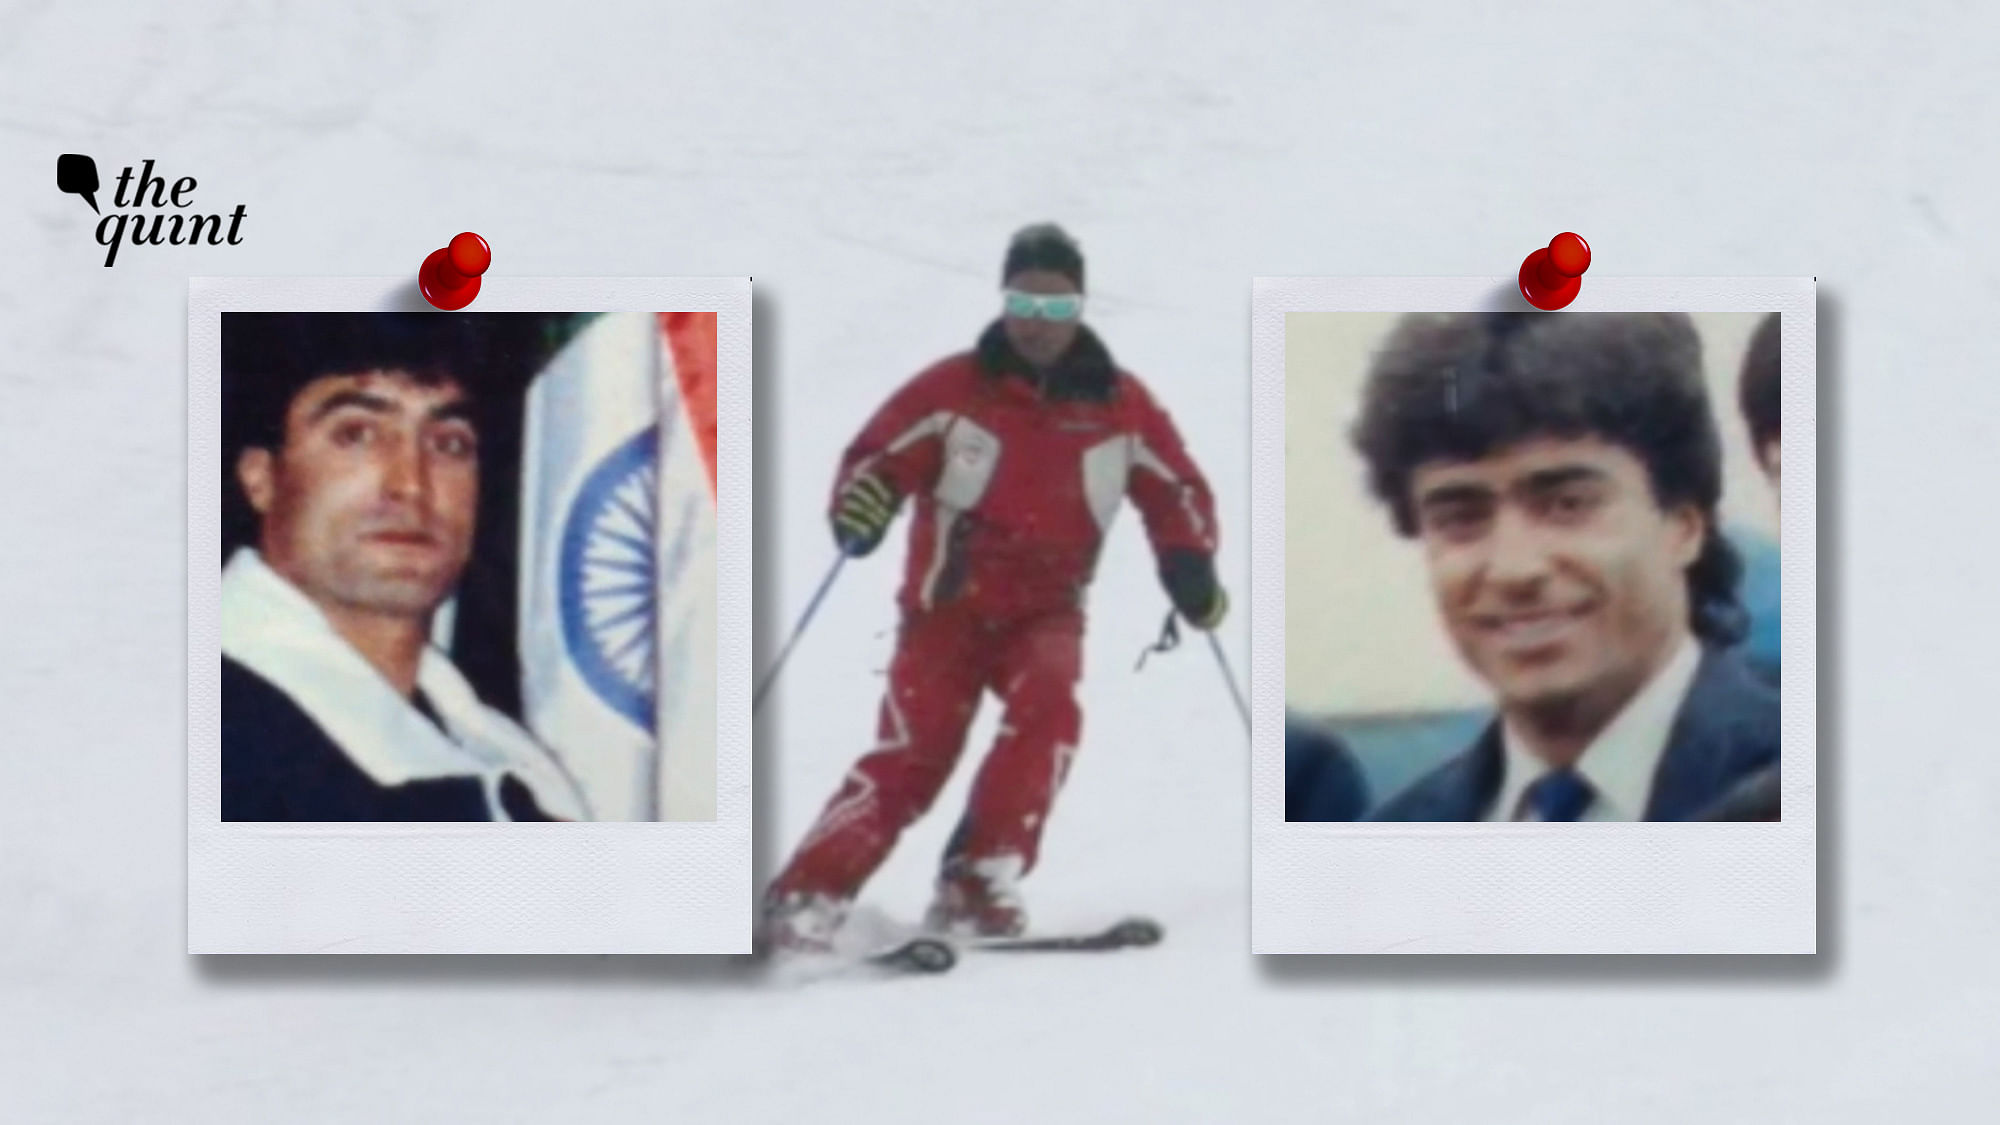 Kashmi’s first winter Olympian Gul Mustafa Dev, talks about his career as a skier and now as a coach.